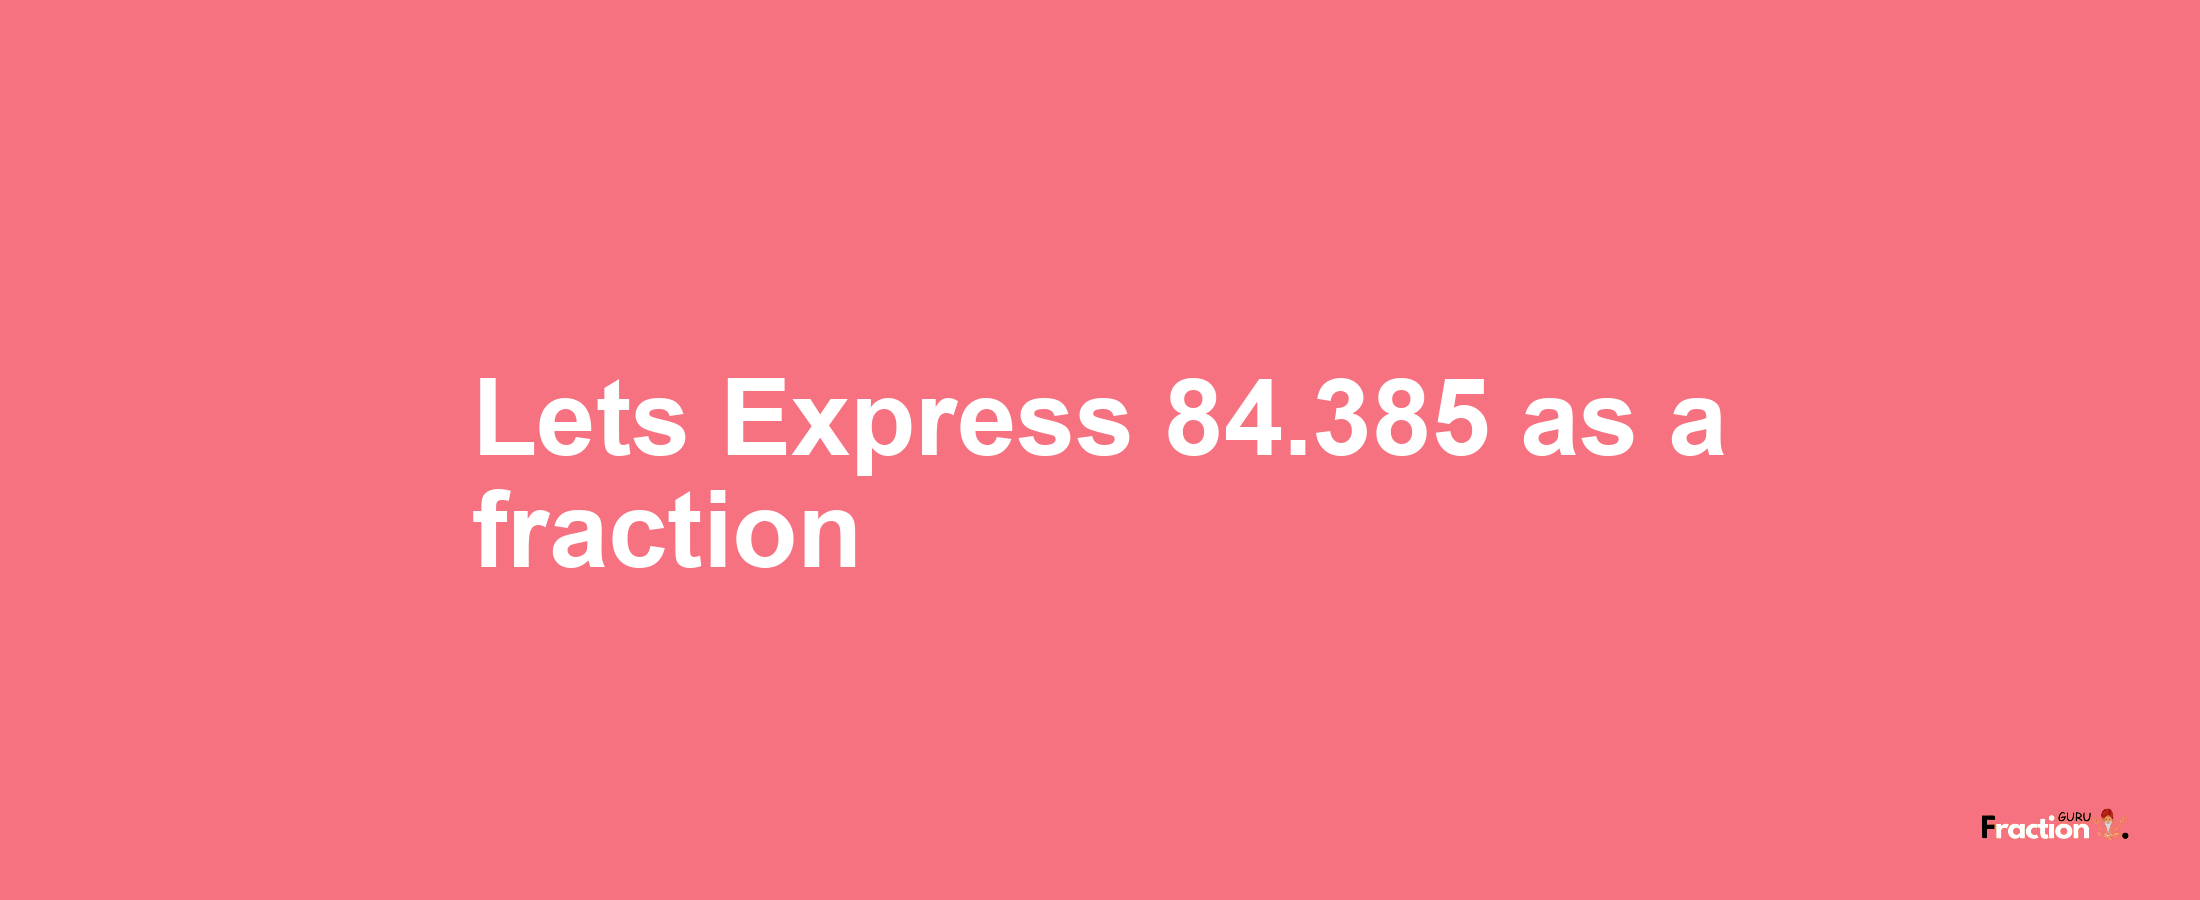 Lets Express 84.385 as afraction